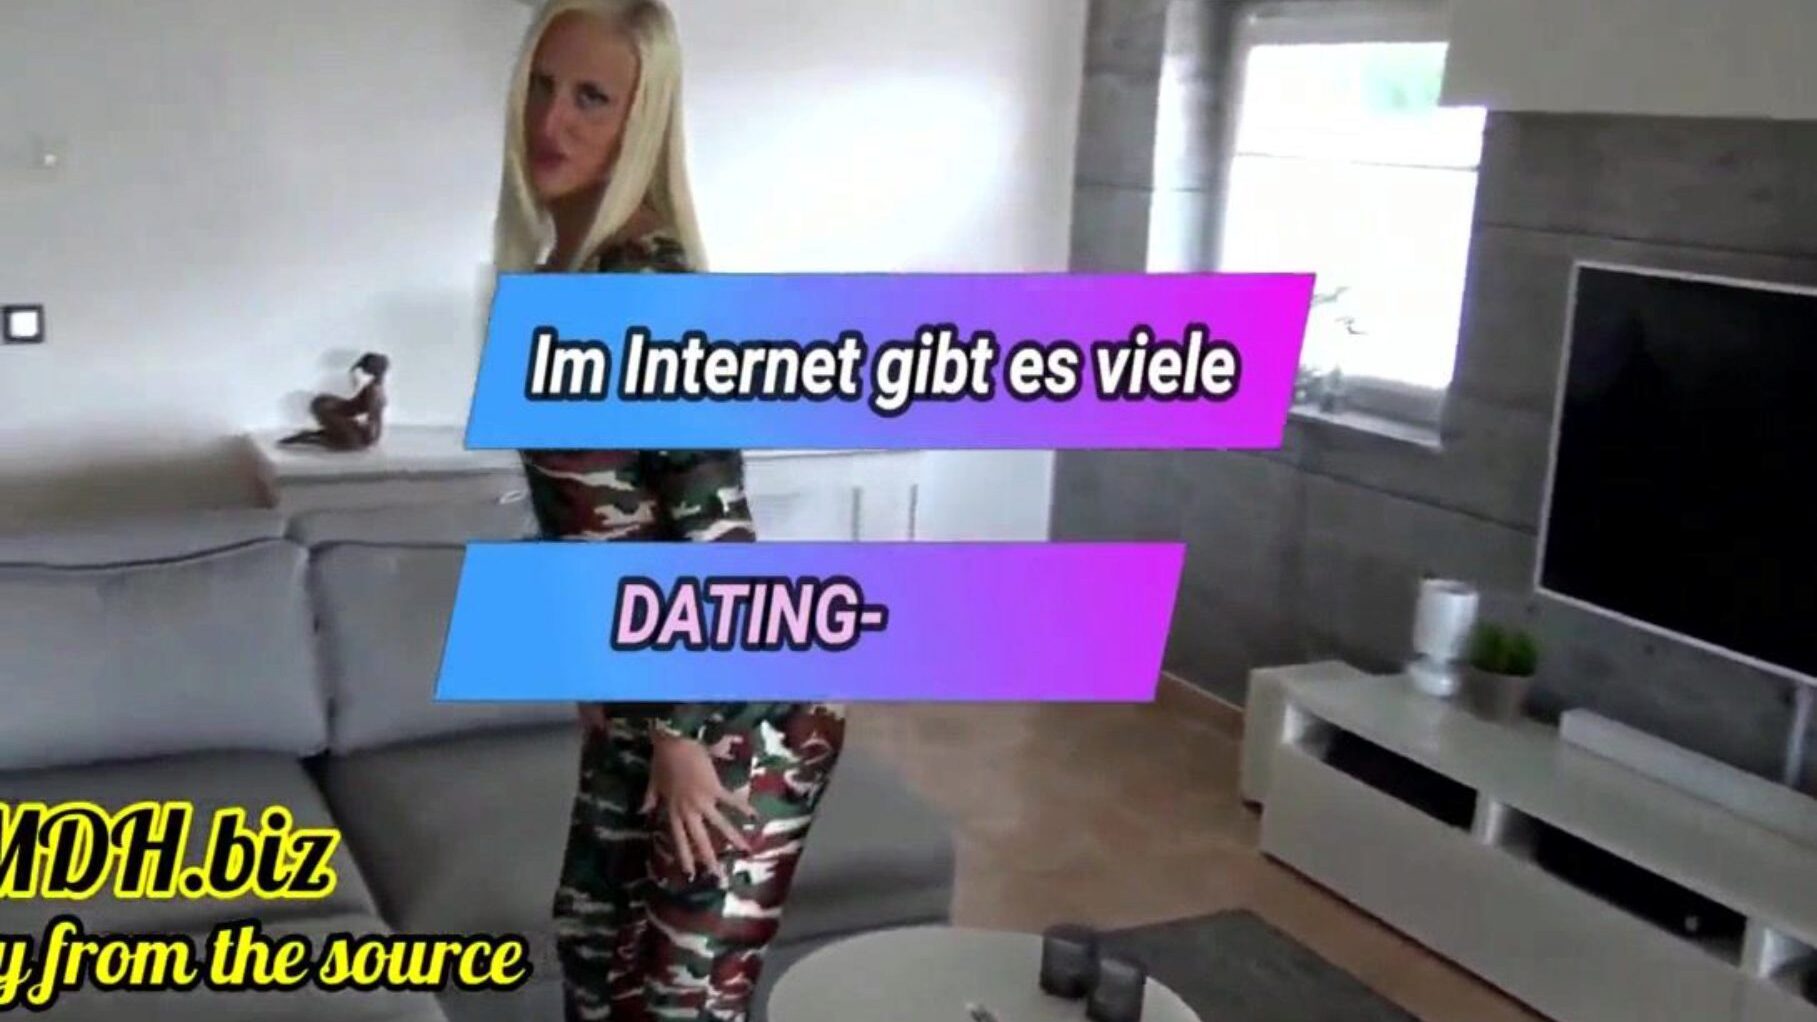 grob arsch deutsche mother I would like to fuck gefickt hart - riesiger cumshot watch grob arsch deutsche mother I would like to fuck gefickt hart - riesiger cumshot movie scene on xhamster - the Ultimate Database of free-for-all german squirting hd porno tube أفلام